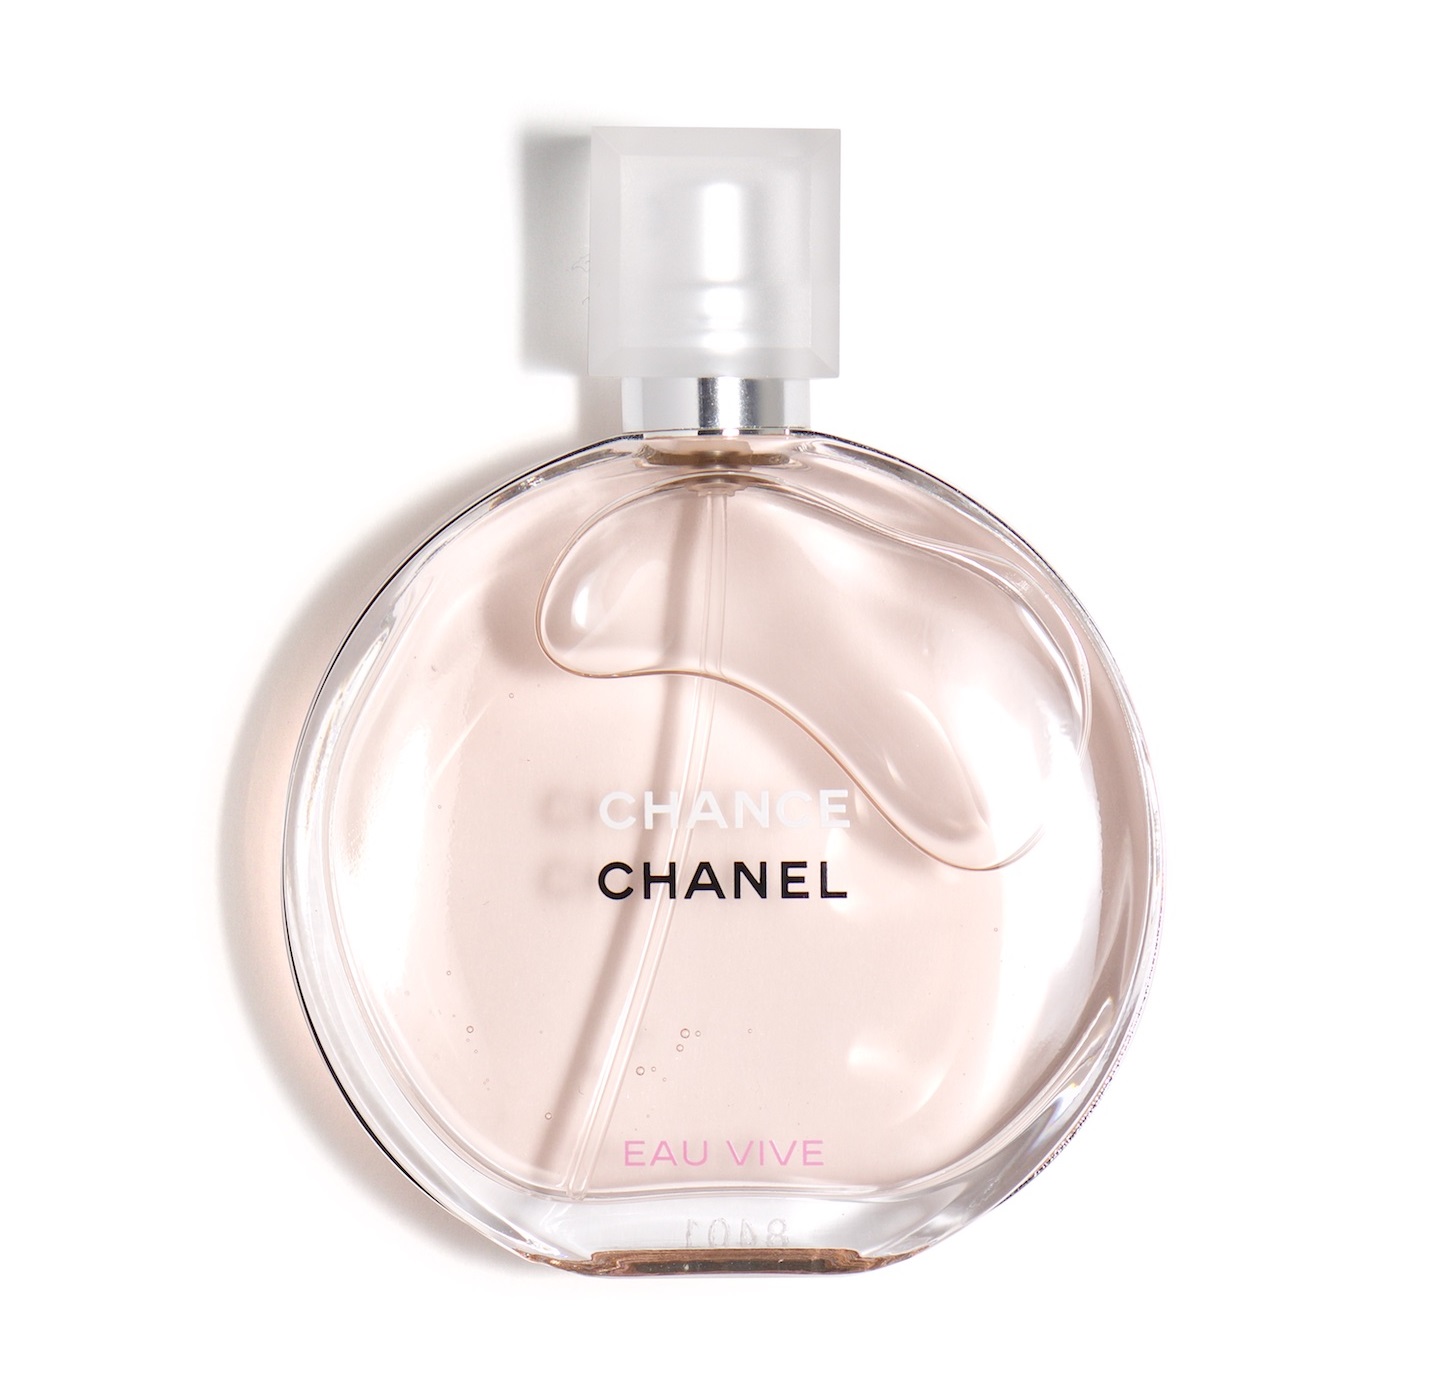 Buy Chance Eau Vive by Chanel for Women EDT 50mL